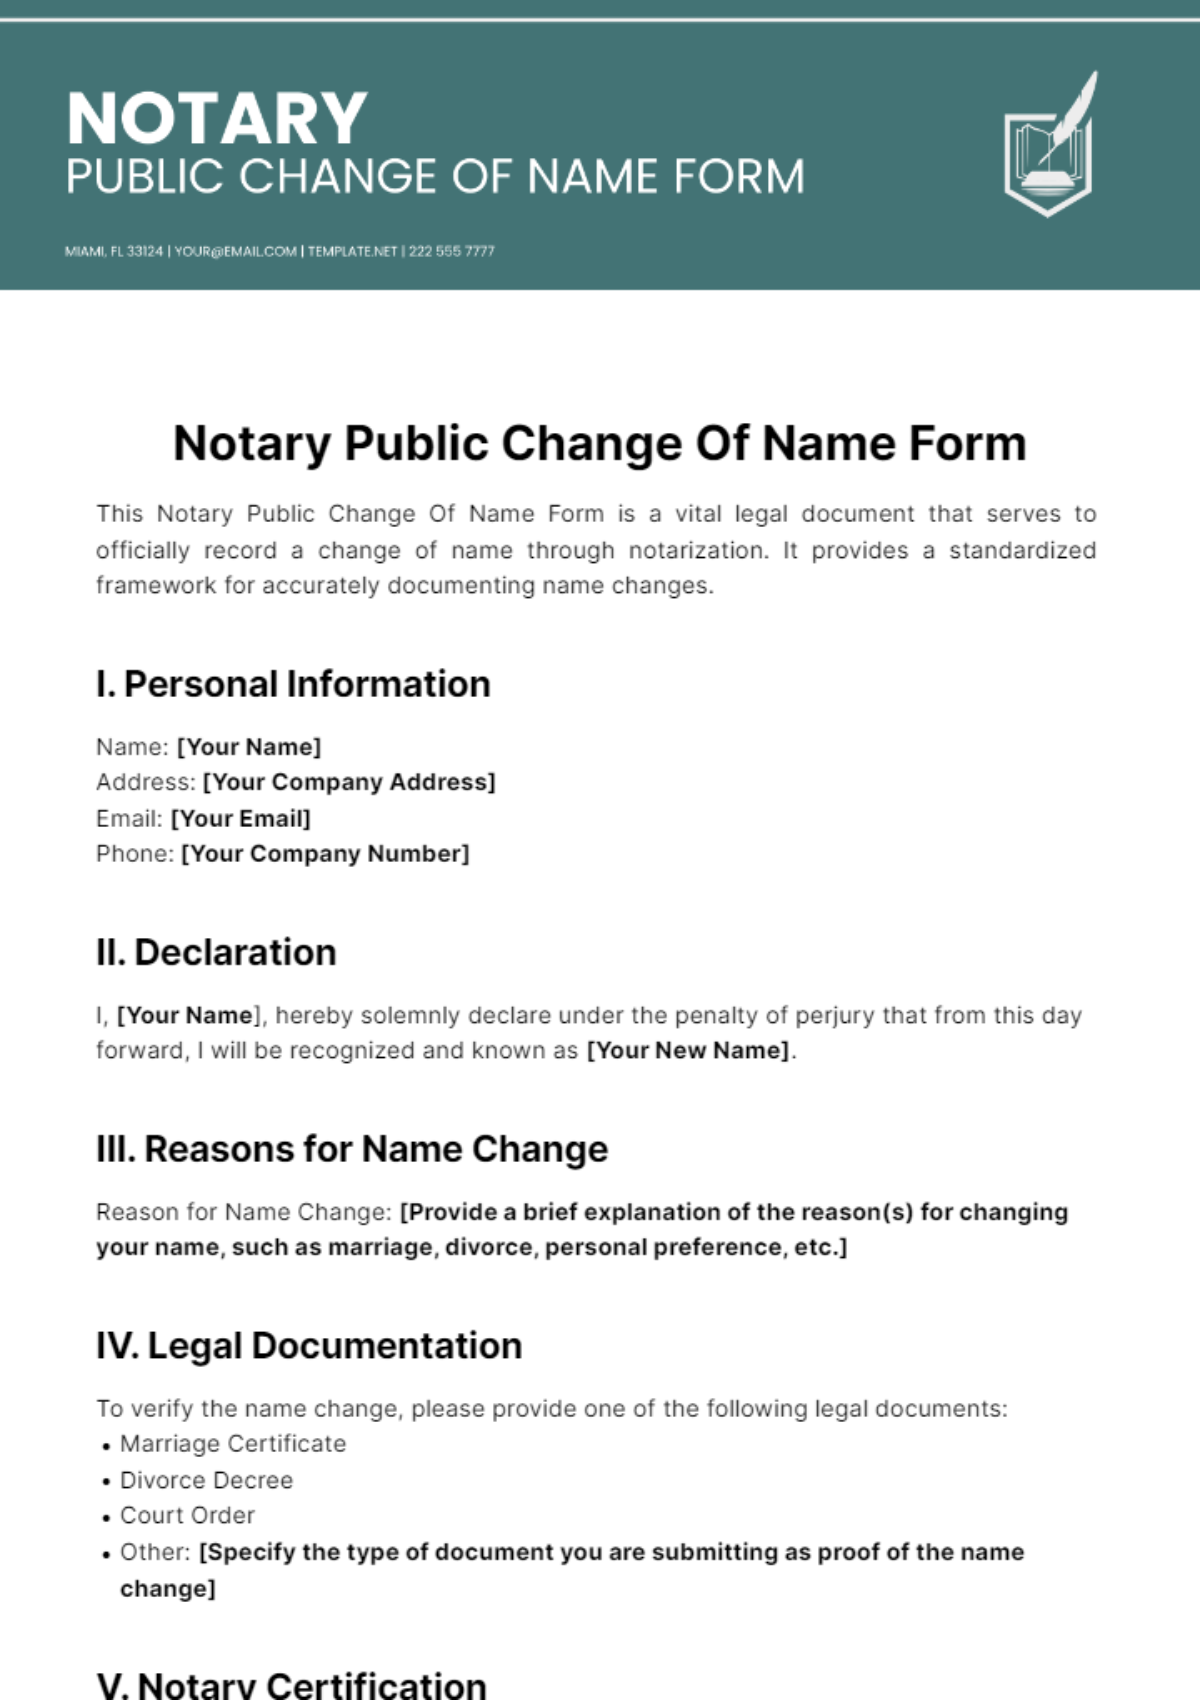 Notary Public Change Of Name Form Template